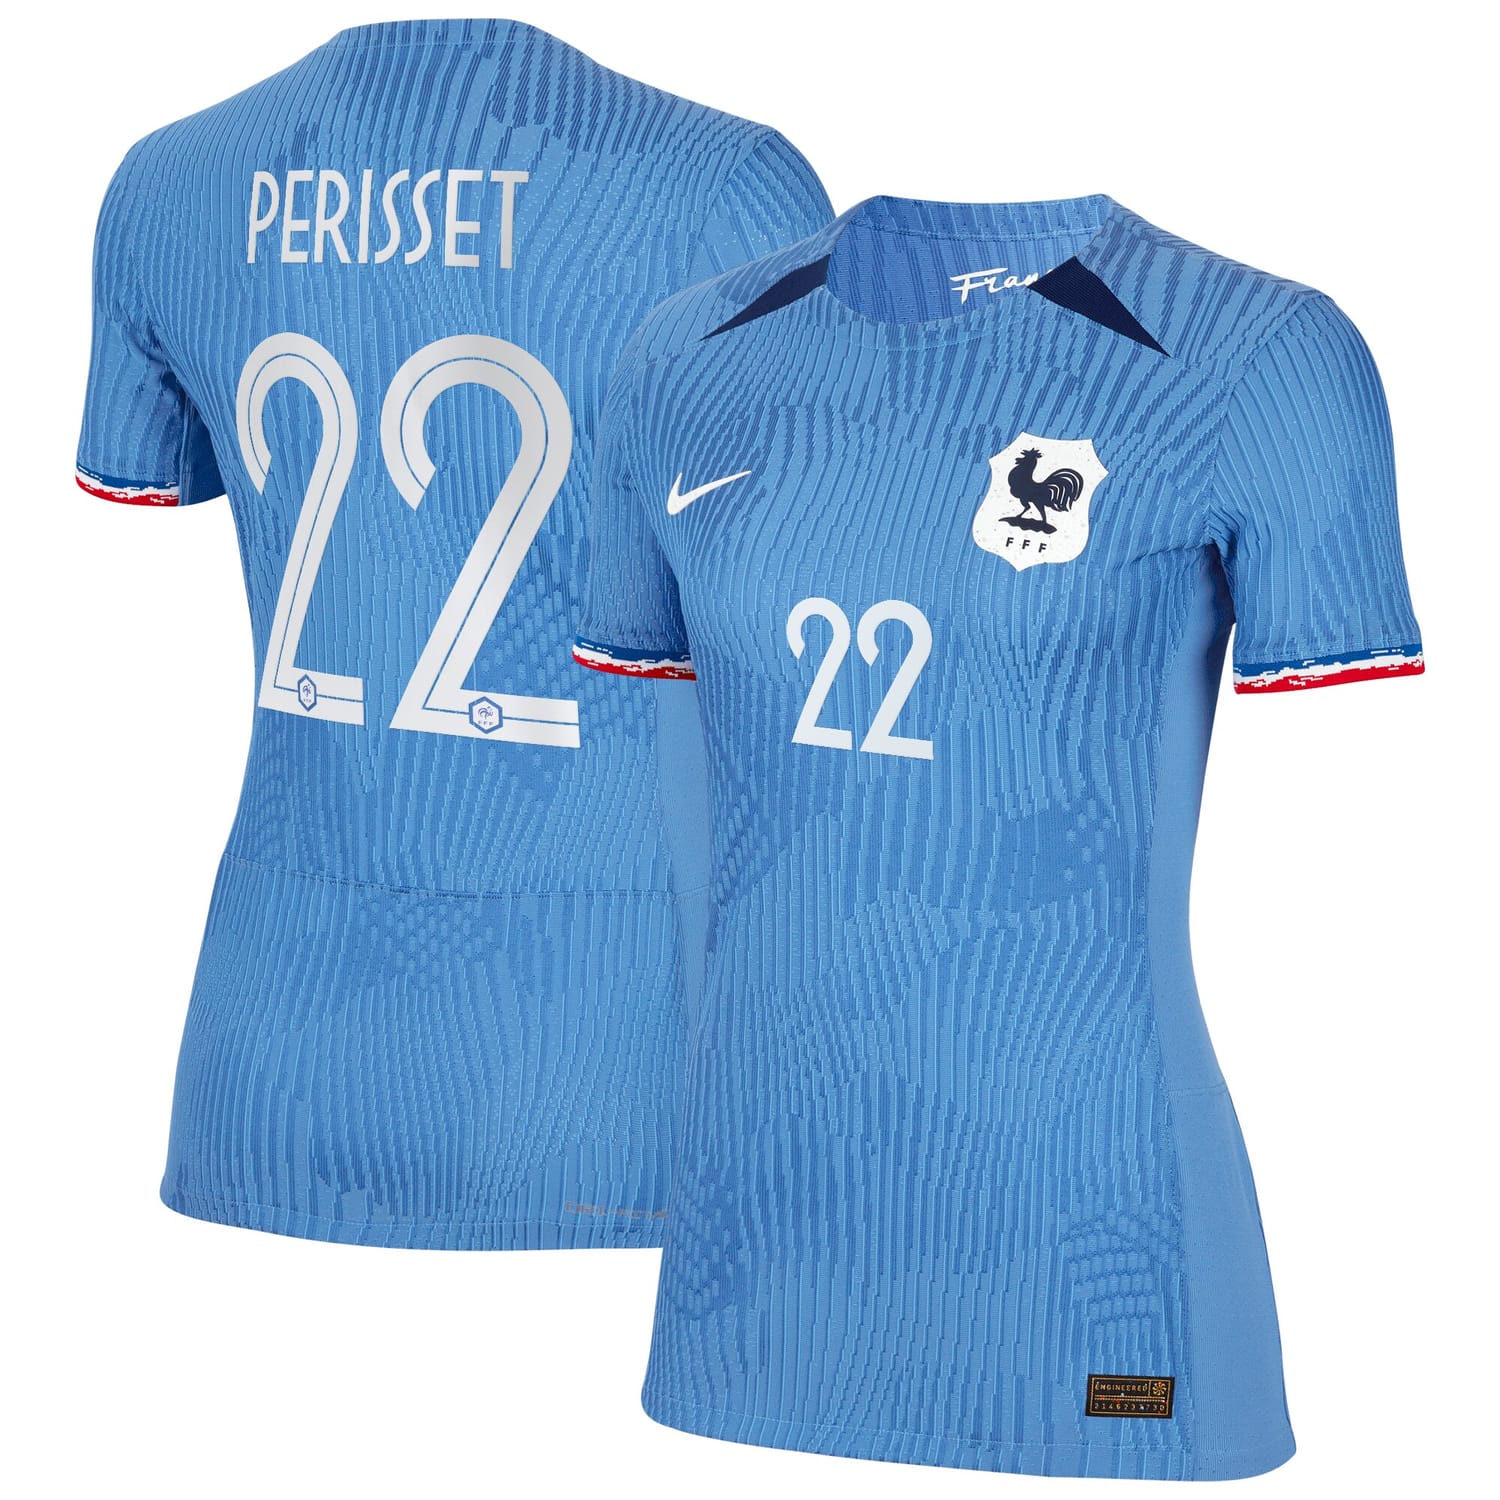 France National Team Home Authentic Jersey Shirt 2023-24 player Eve Perisset 22 printing for Women